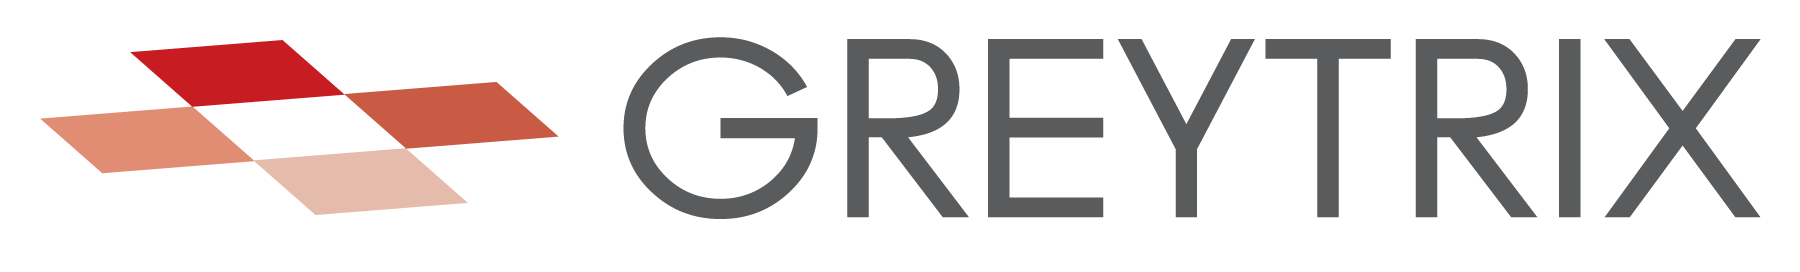 Checkbook.io ACH/Digital Check Payments - Greytrix India Private Limited